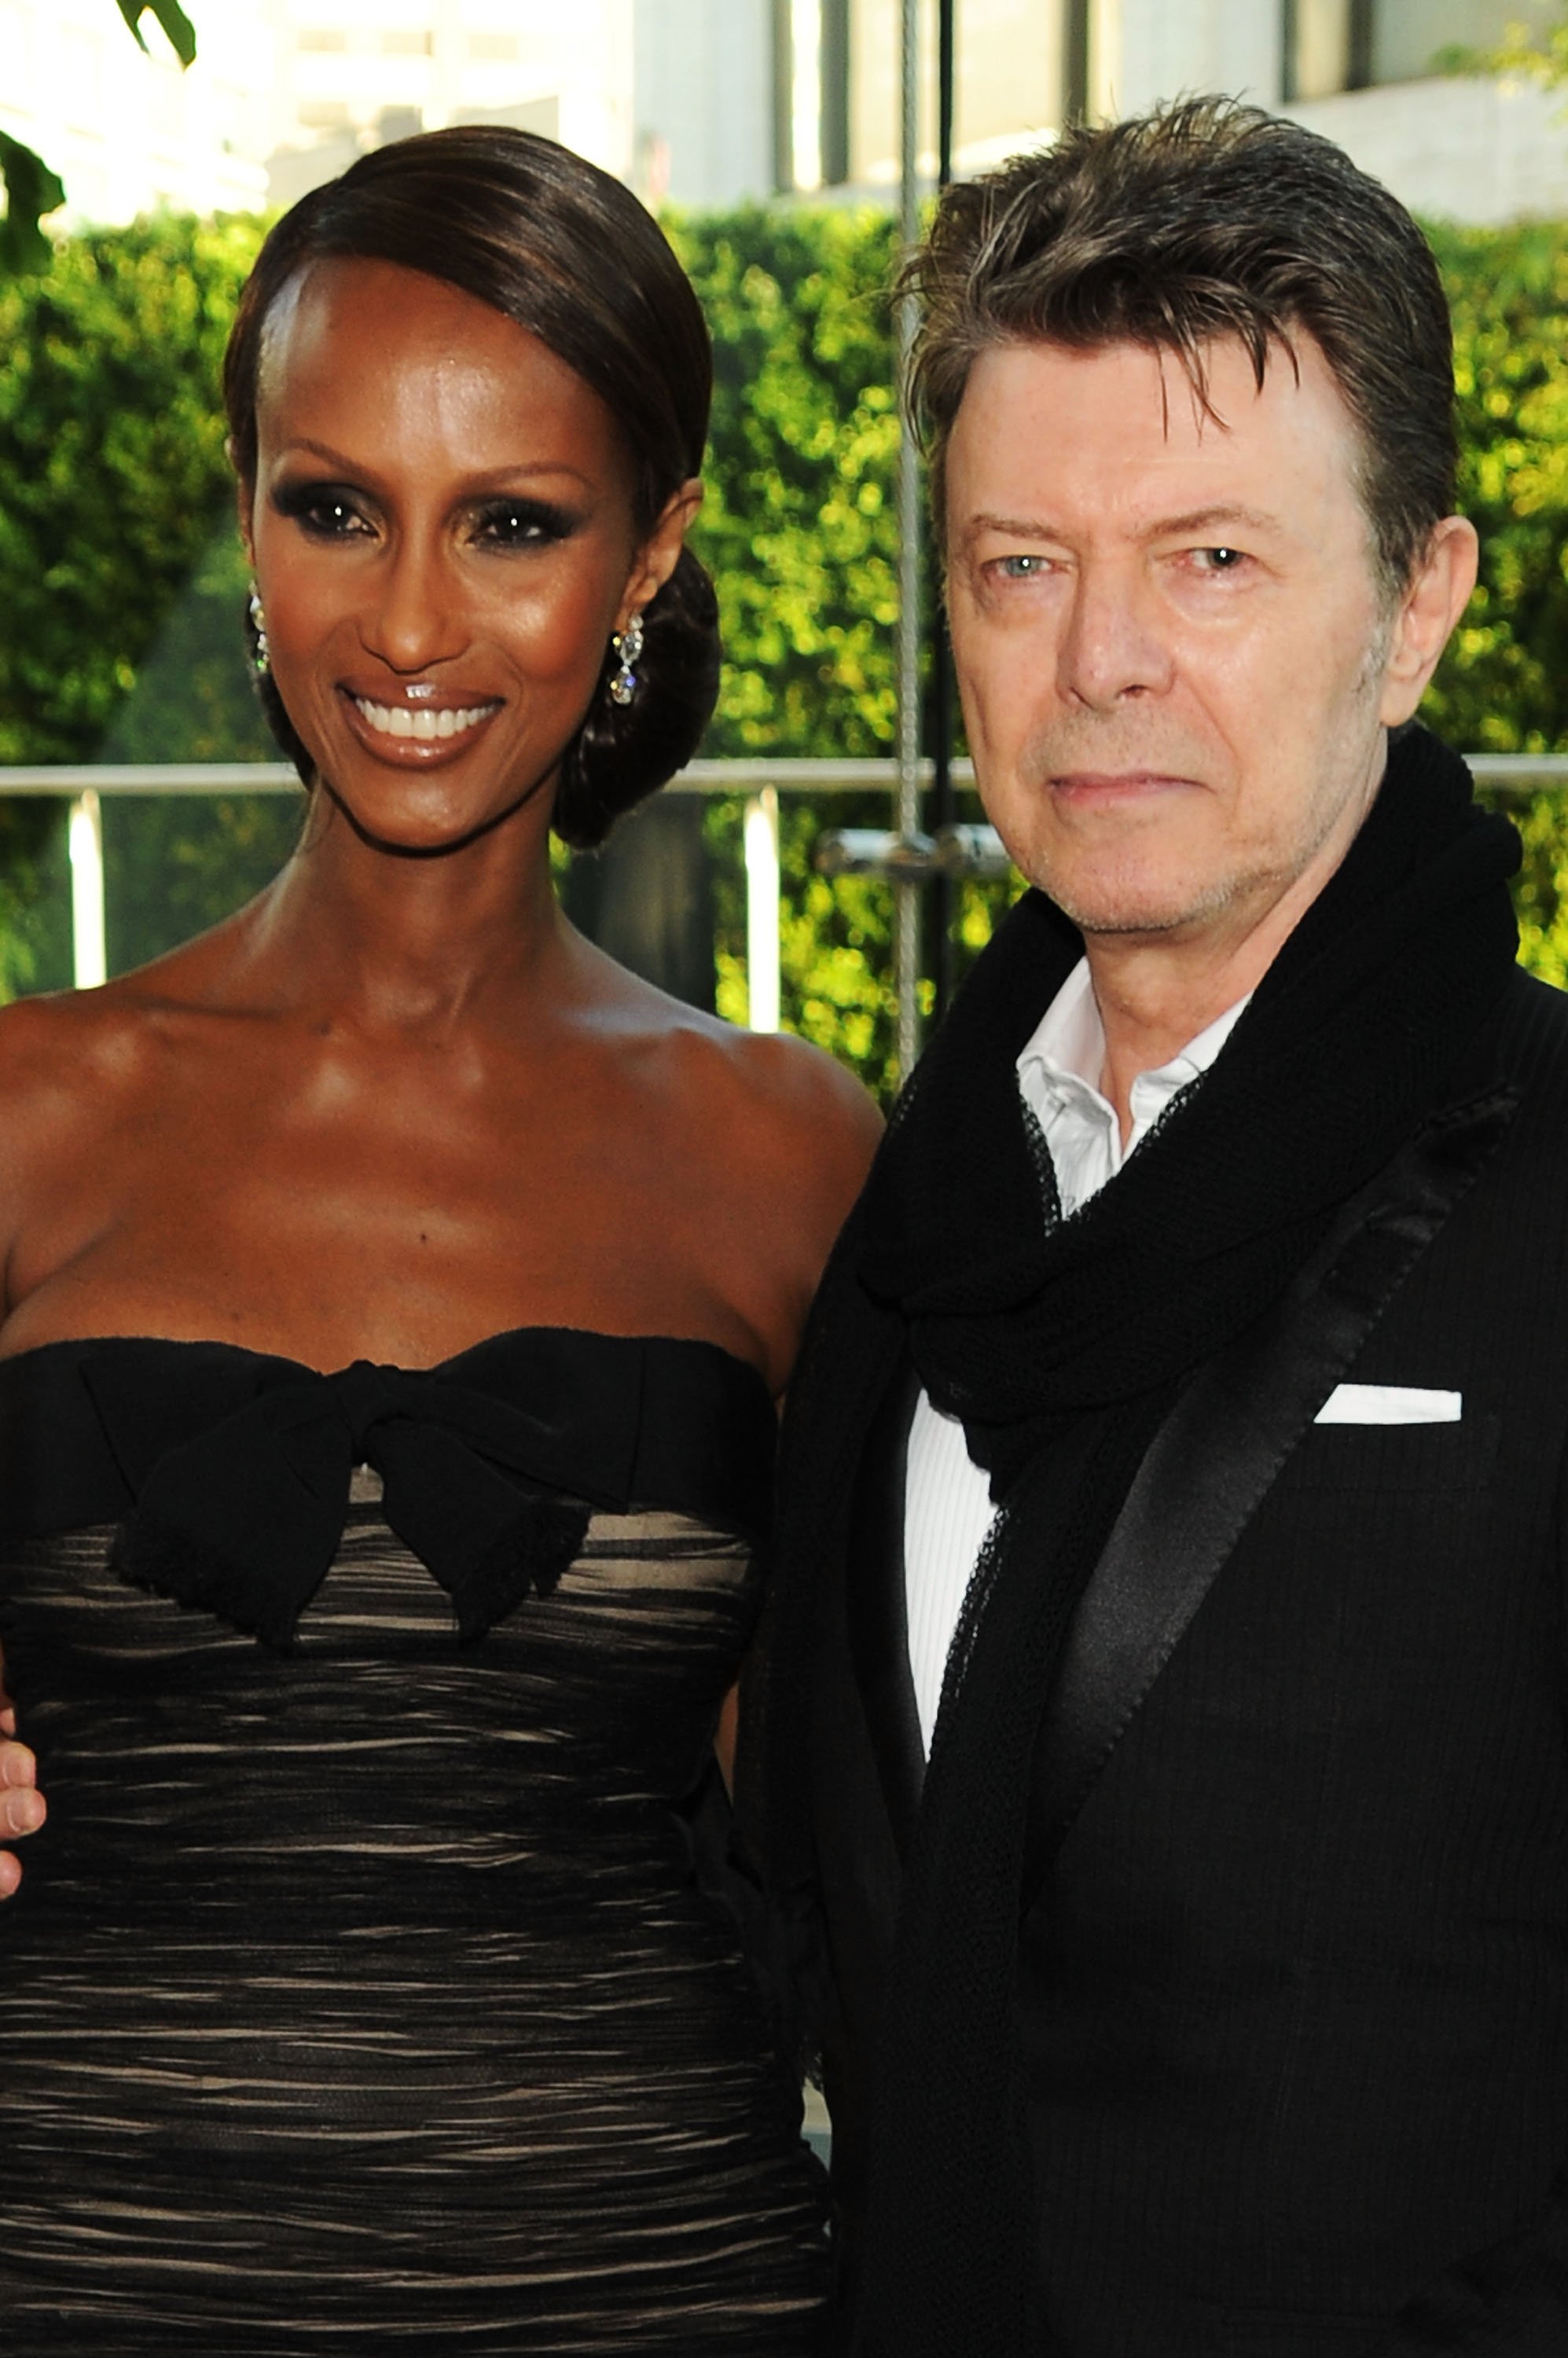 Model Iman and musician David Bowie attend the 2010 CFDA Fashion Awards at Alice Tully Hall, Lincoln Center on June 7, 2010 in New York City | Source: Getty Images